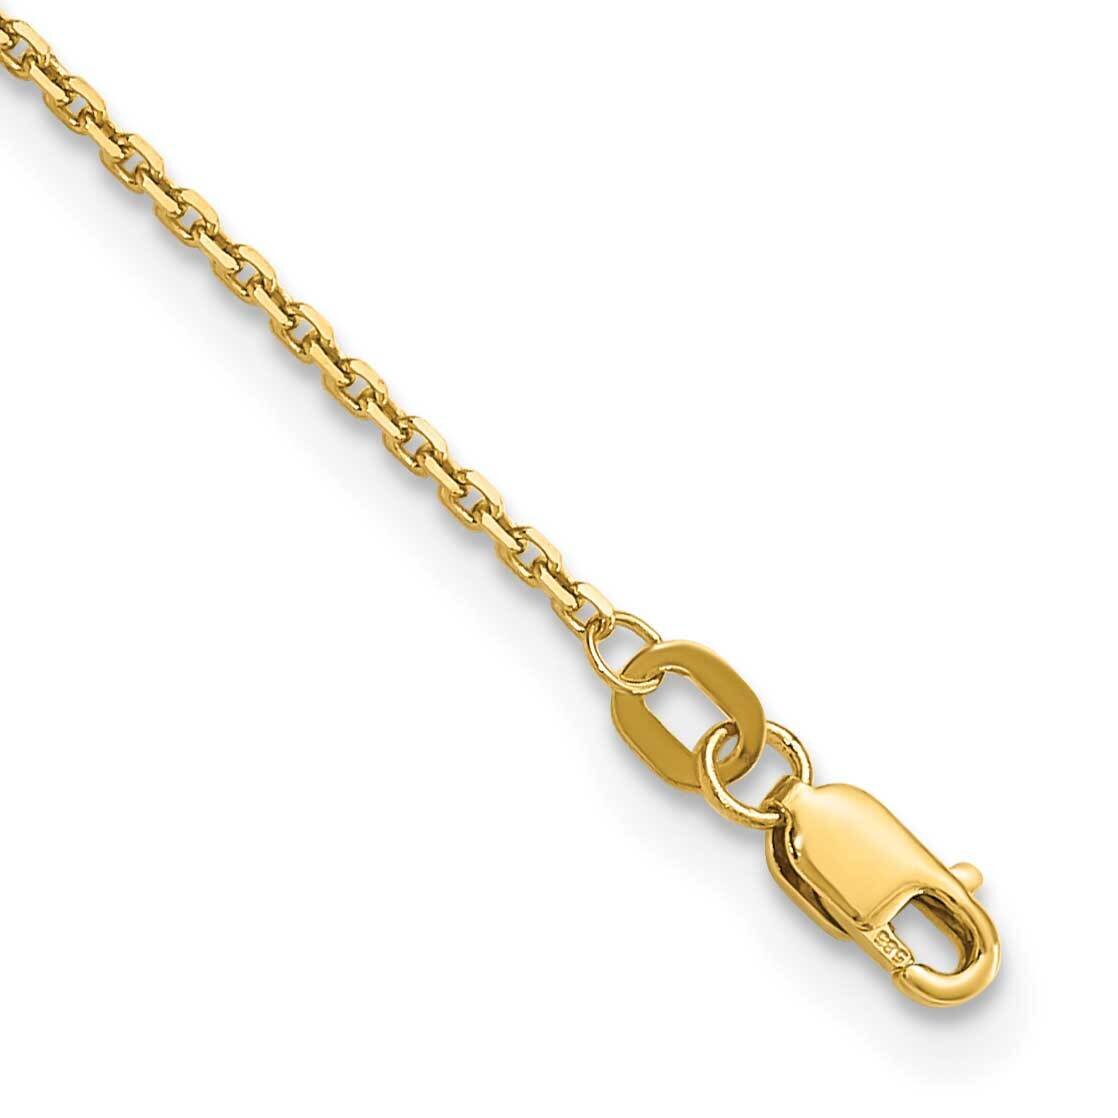 10 Inch 1.4mm Diamond-Cut Round Open Link Cable with Lobster Clasp Anklet 14k Gold PEN203-10